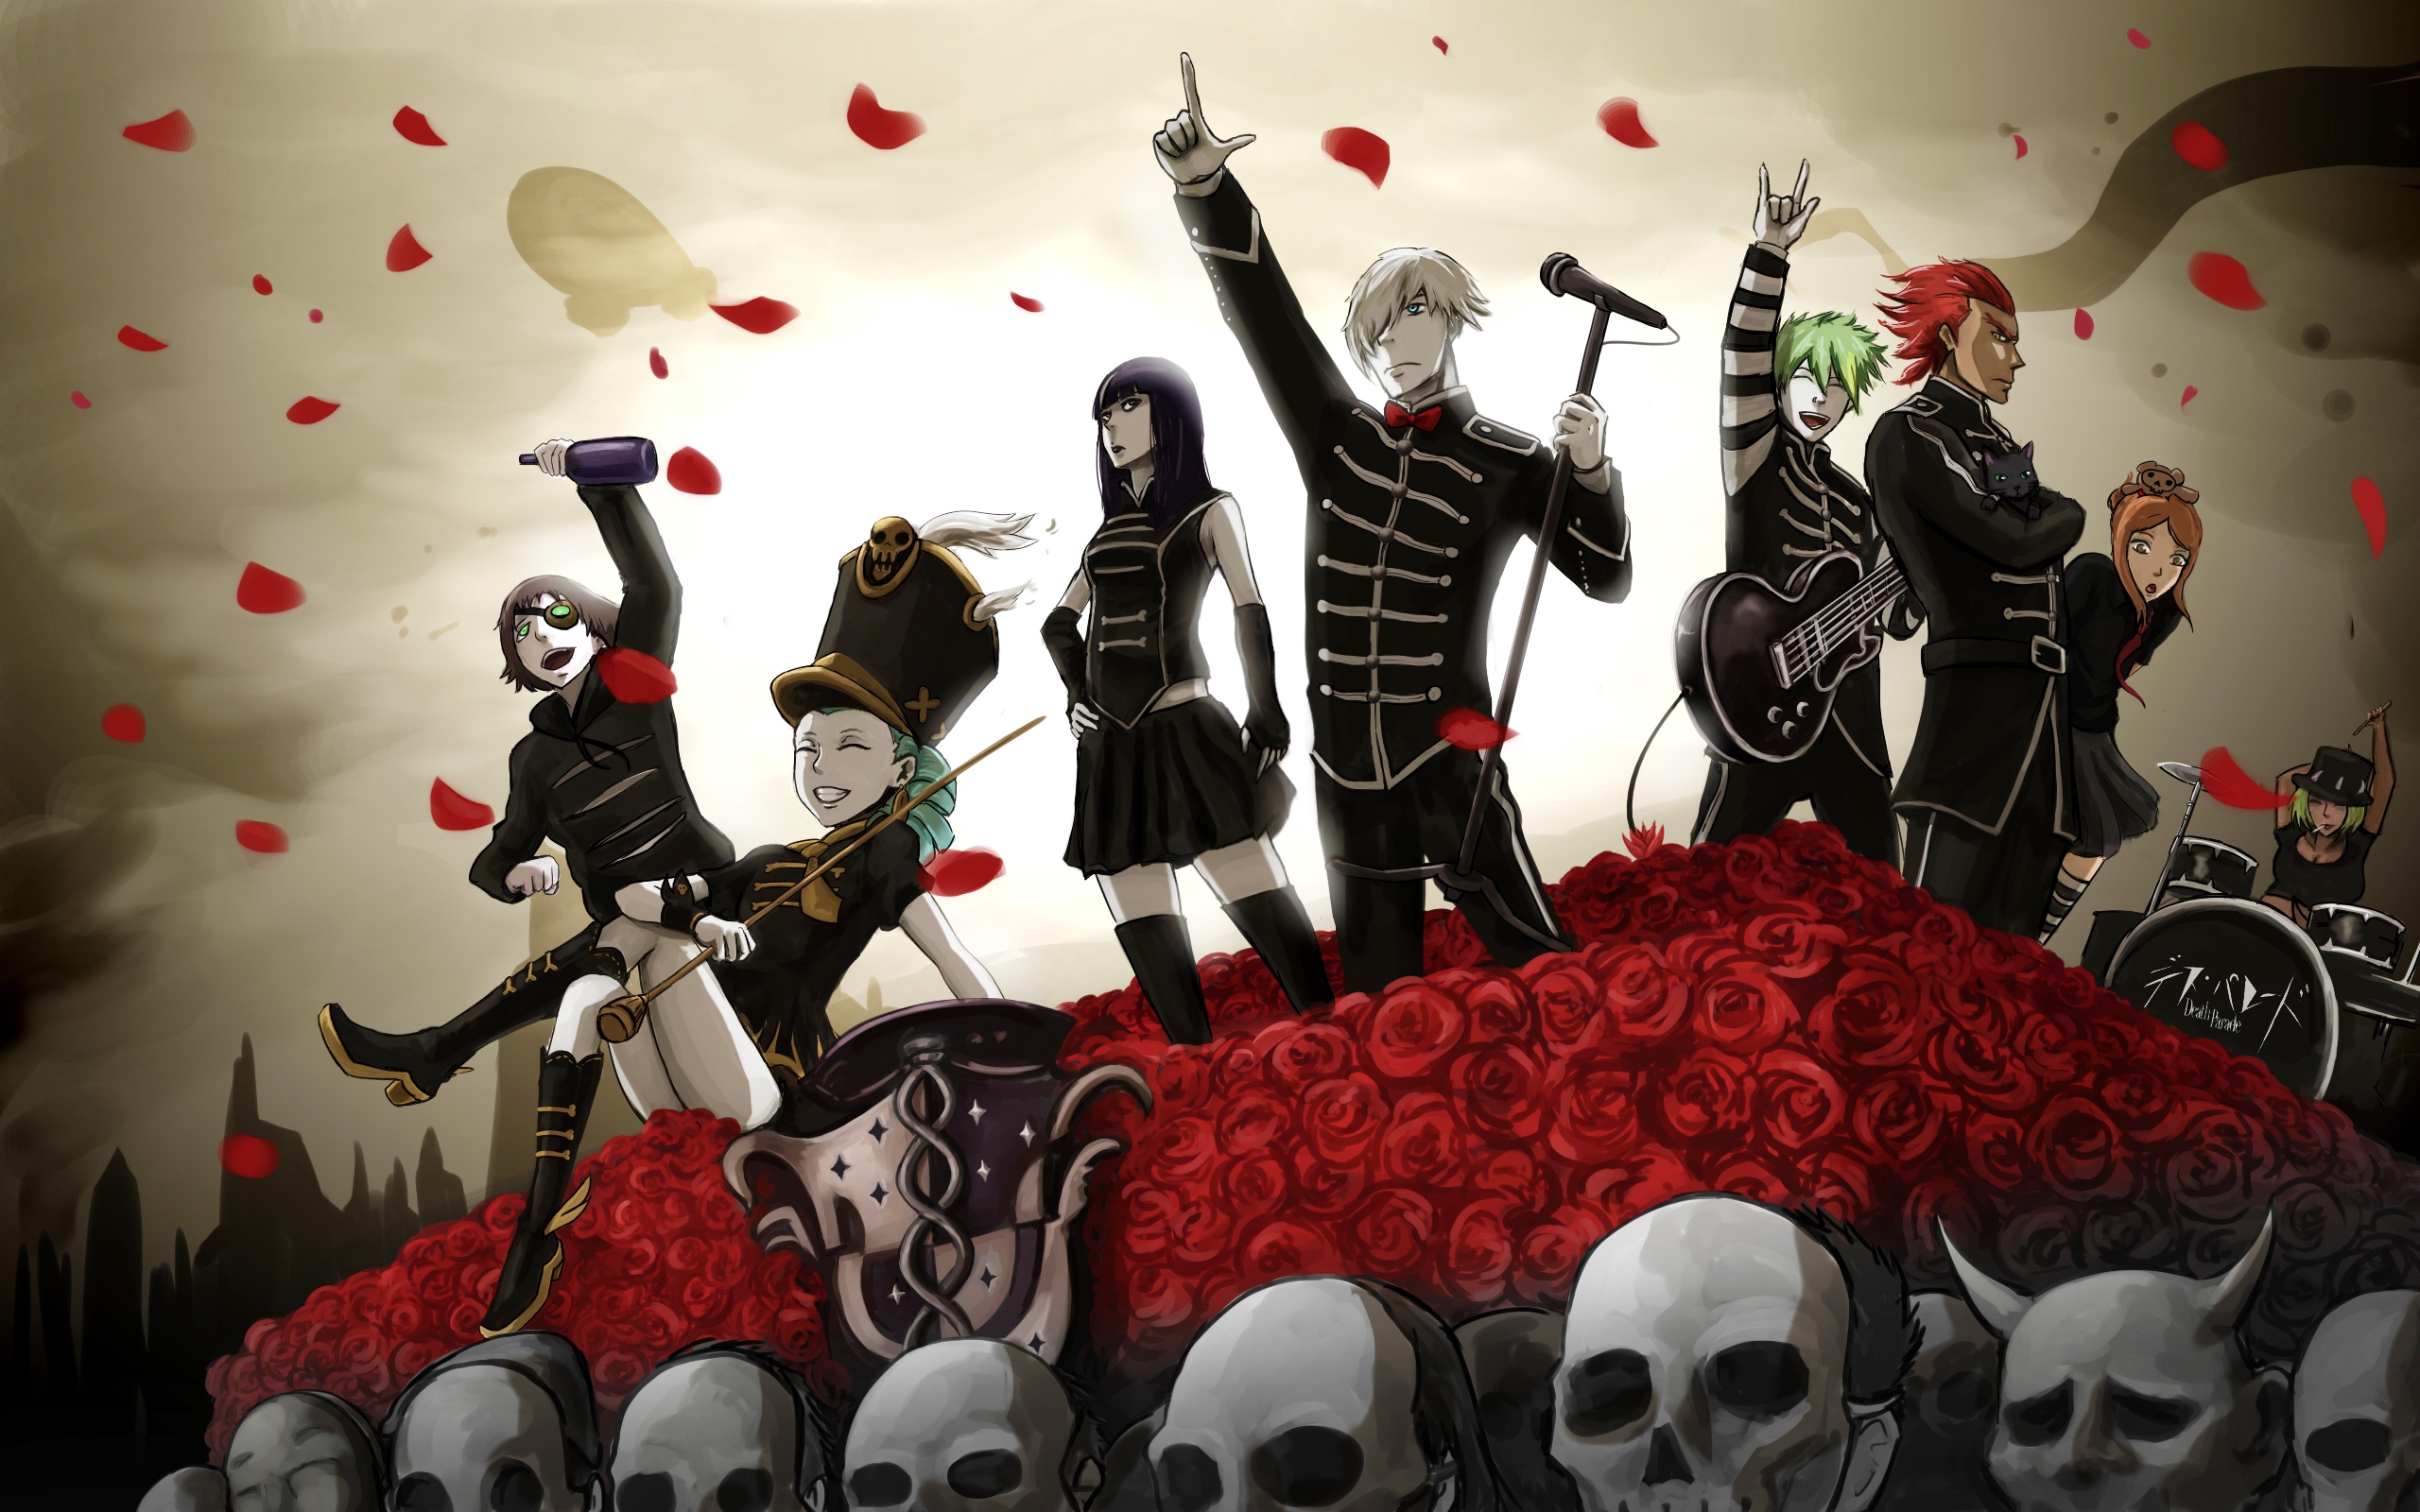 Welcome to the Death Parade by QOSiC